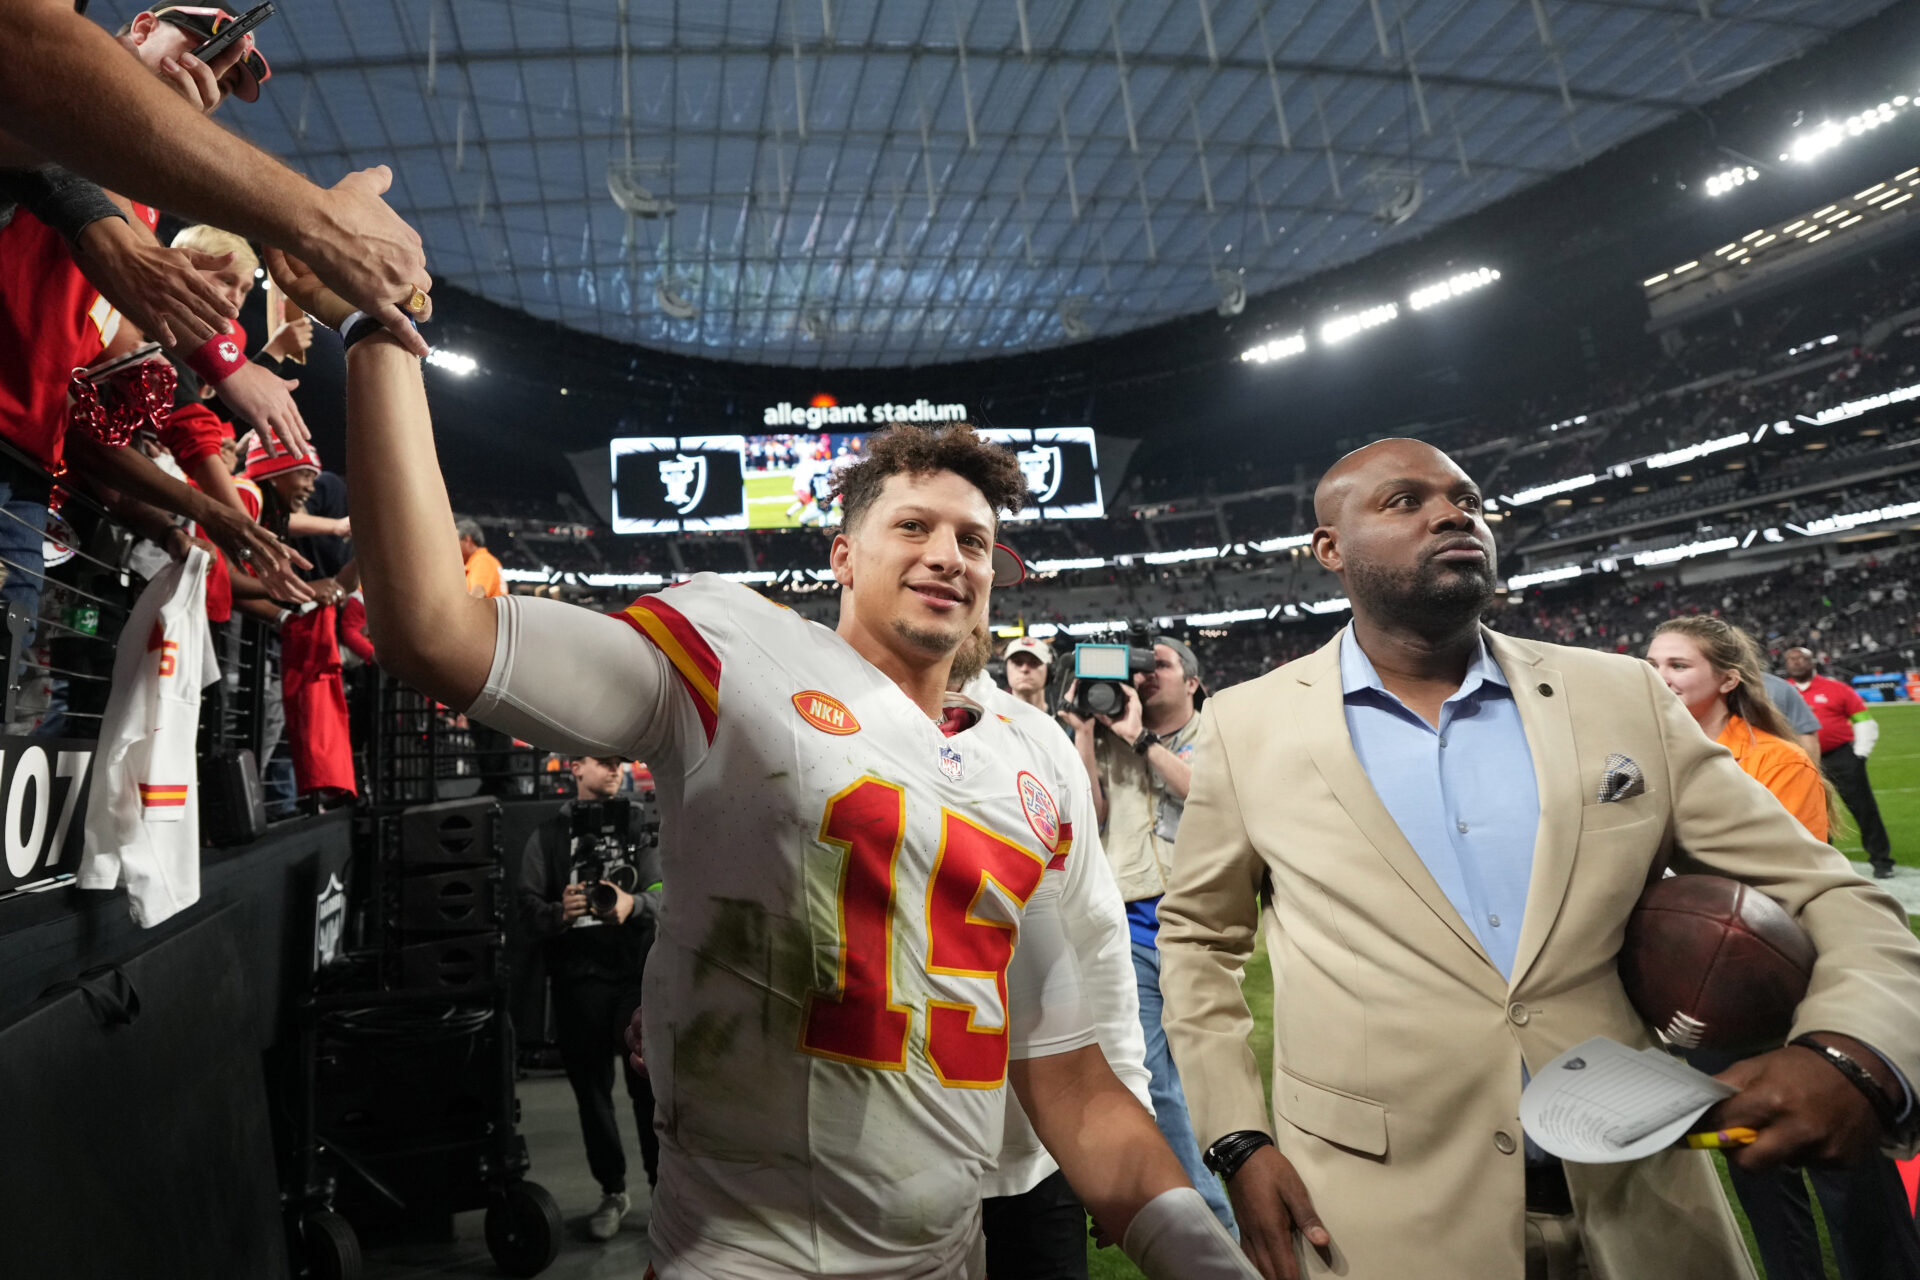 Kansas City Chiefs quarterback Patrick Mahomes (15) is escorted by executive vice president of communications Ted Crews after the game against the Las Vegas Raiders Allegiant Stadium.